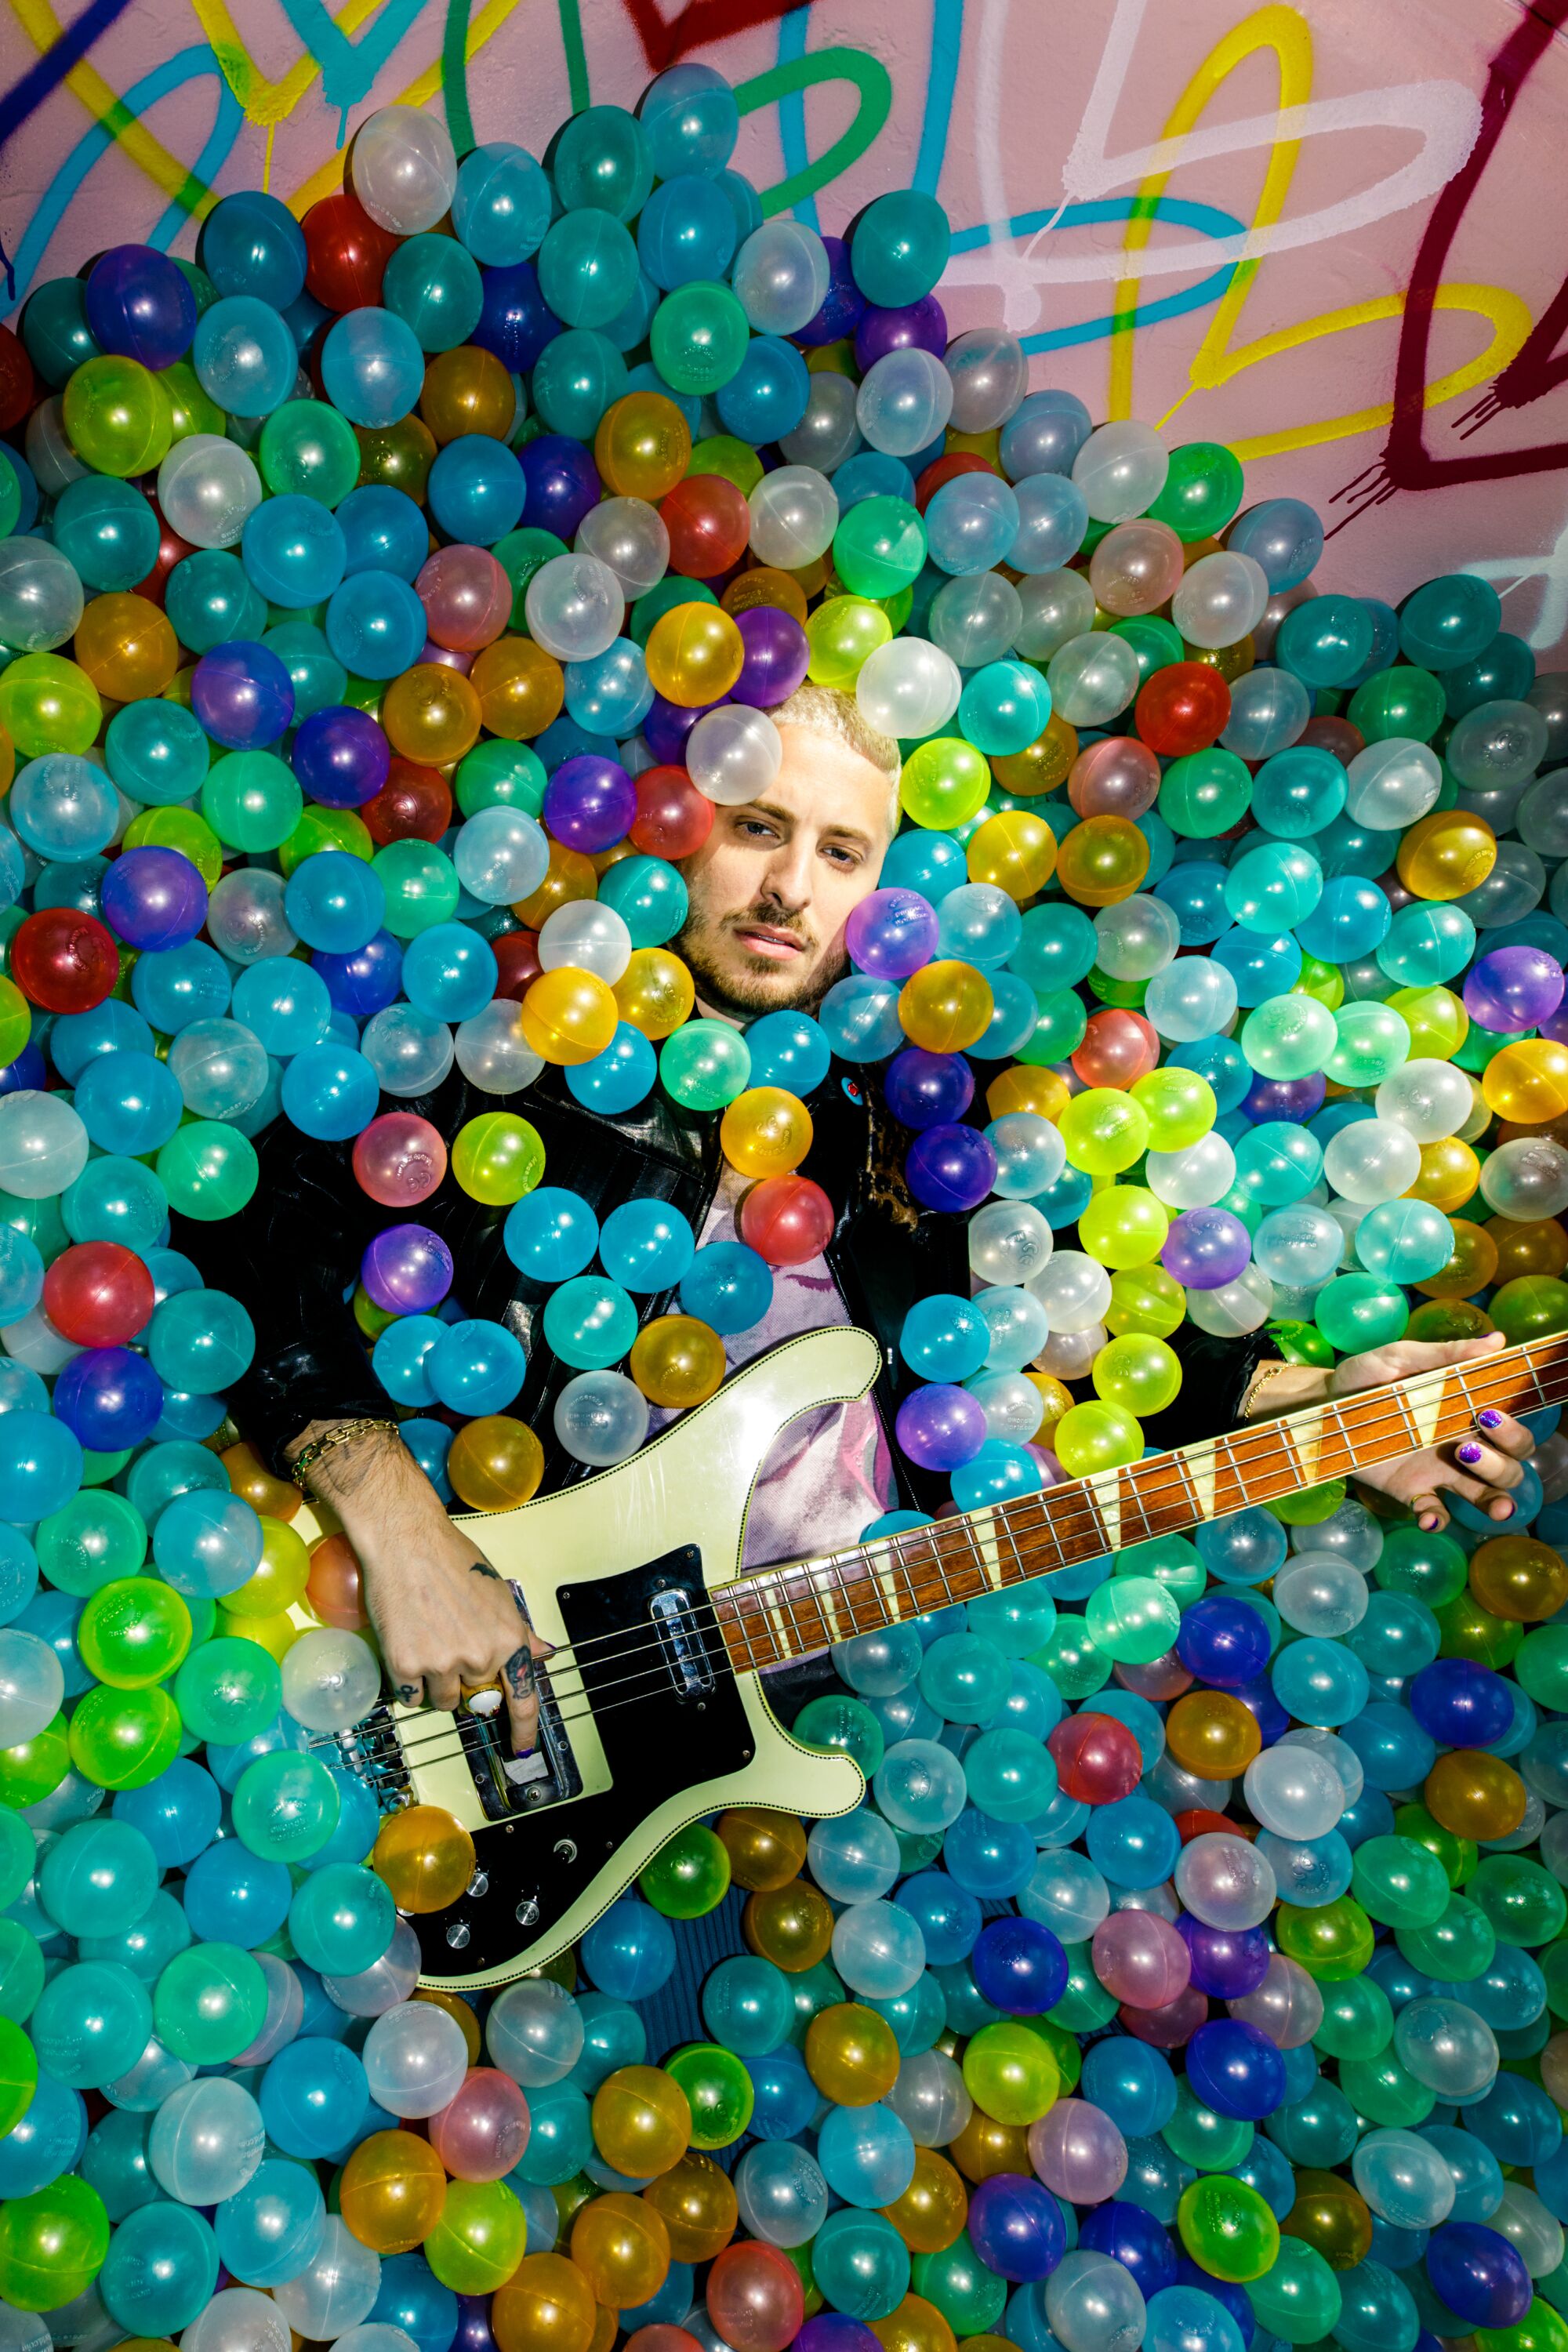 A man holds a guitar while in a colorful ball pit